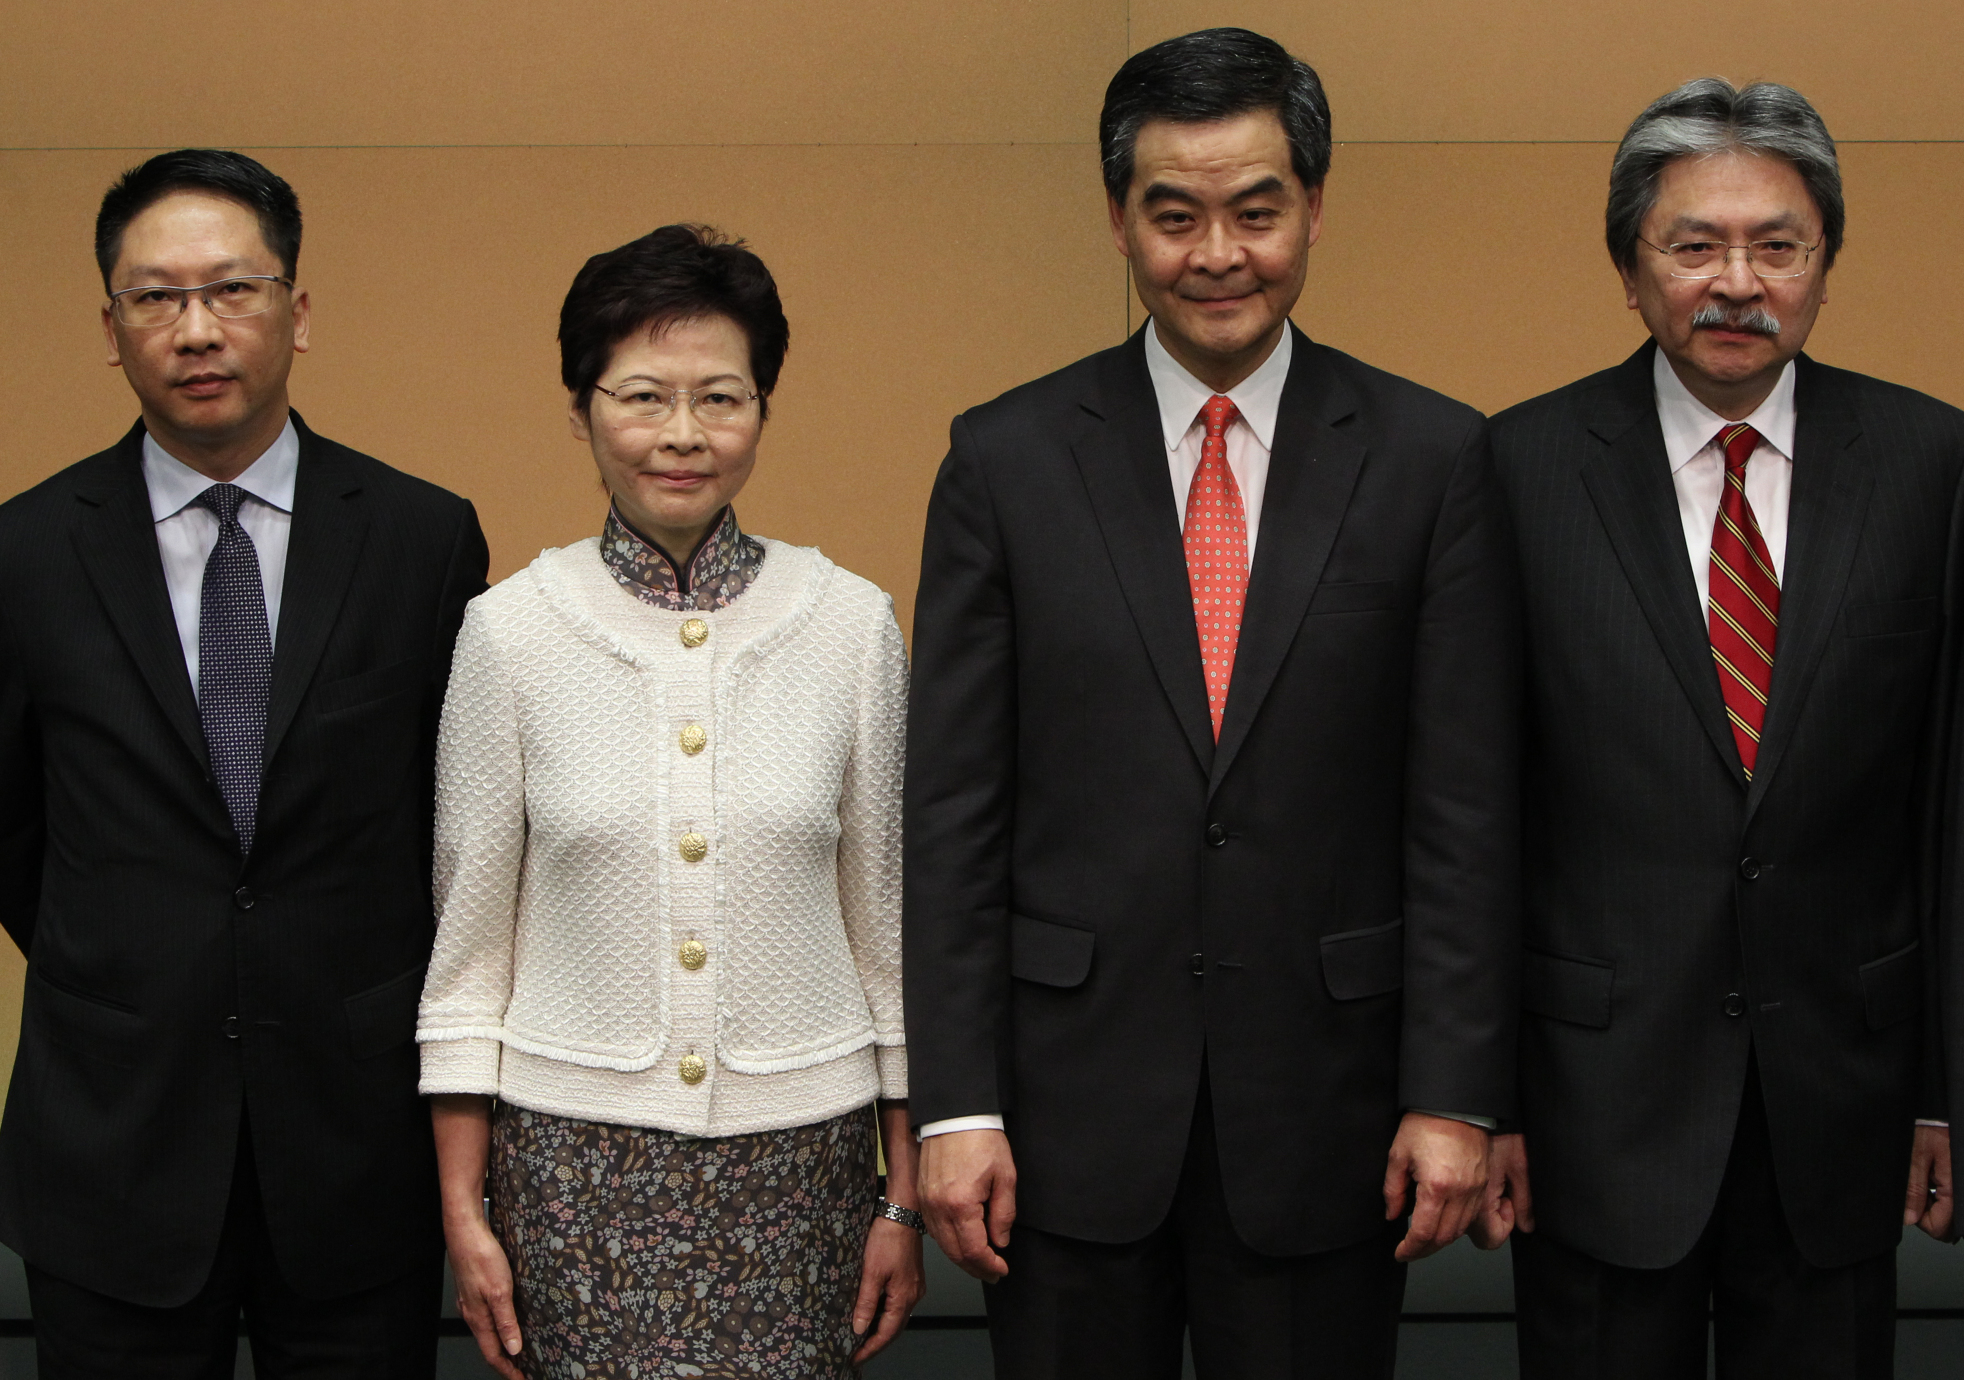 (From left) Secretary for Justice Rimsky Yuen, Chief Secretary for Administration Carrie Lam, Chief Executive Leung Chun-ying, and Financial Secretary John Tsang. Hong Kong leaders must stand up for city's best interests in political reform. Photo: David Wong